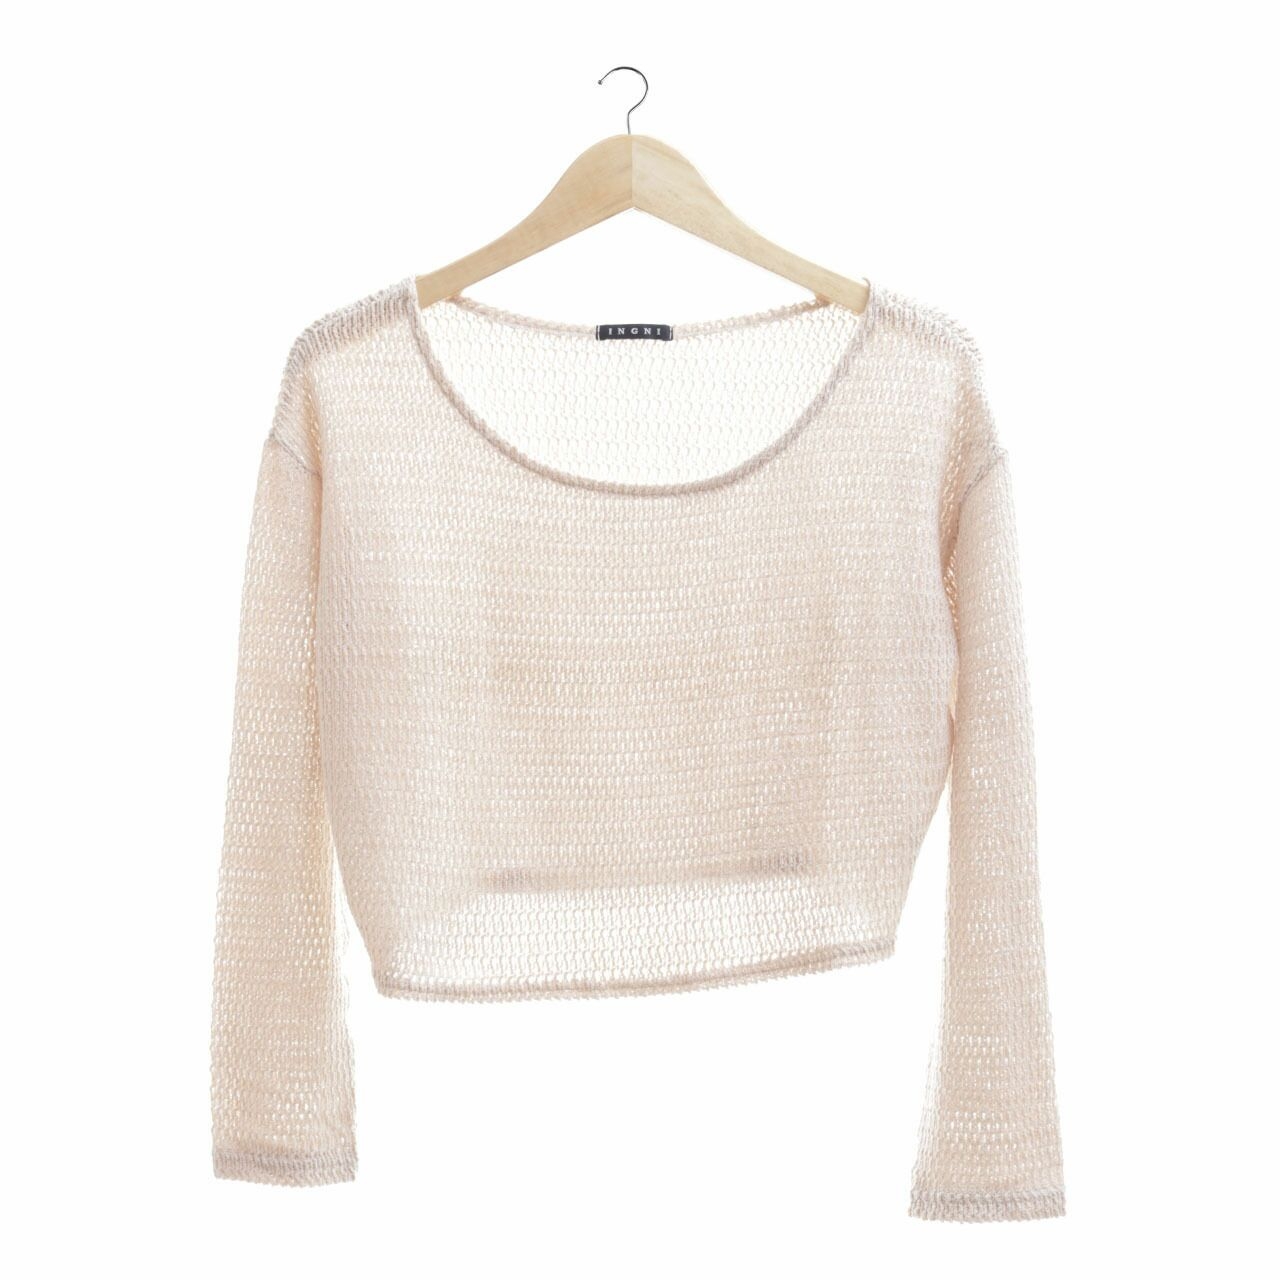 Ingni Beige Knit Perforated Blouse